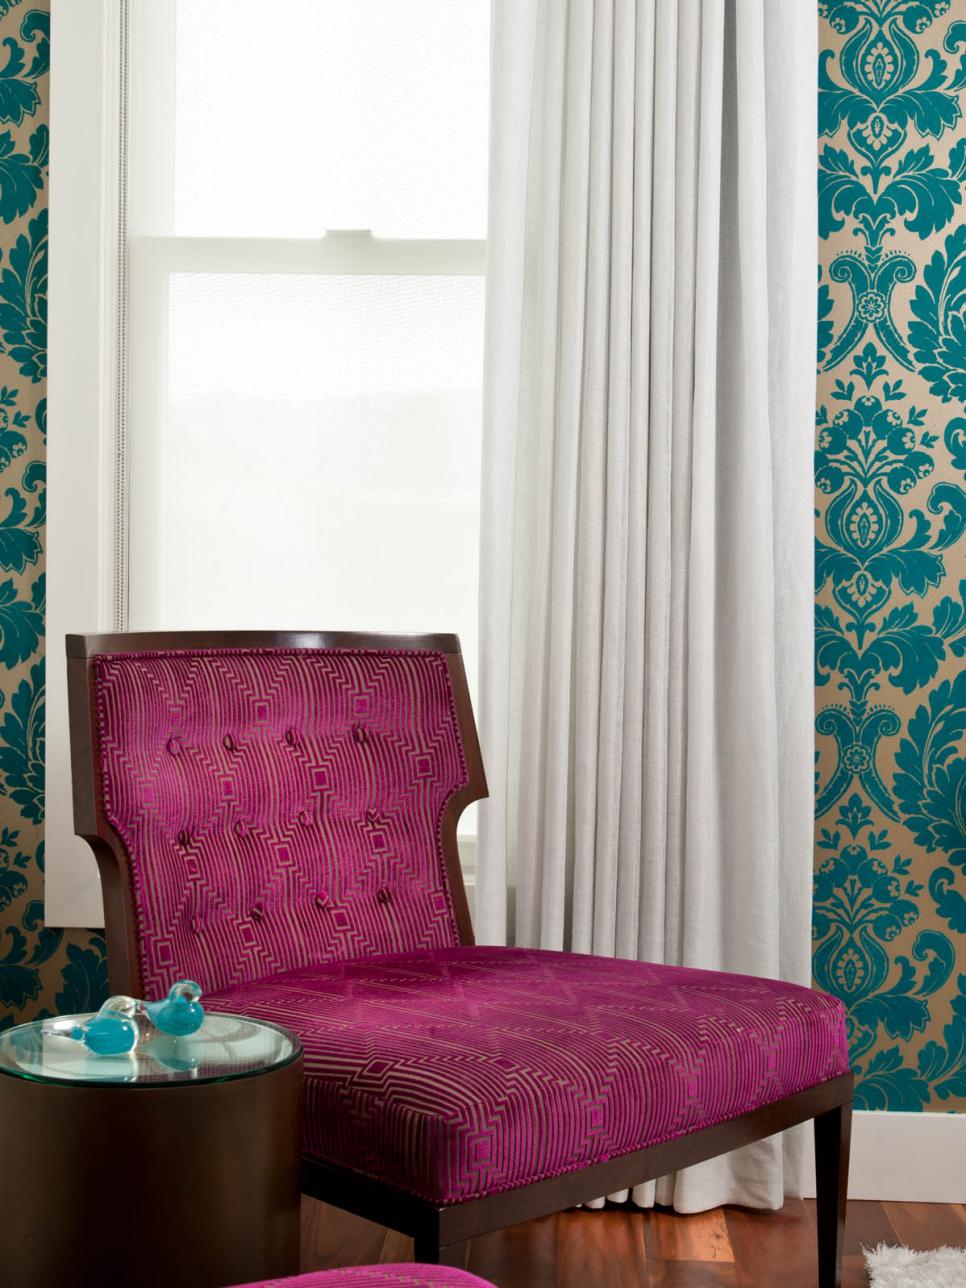 Hot Pink Chair and Teal Damask Wallpaper